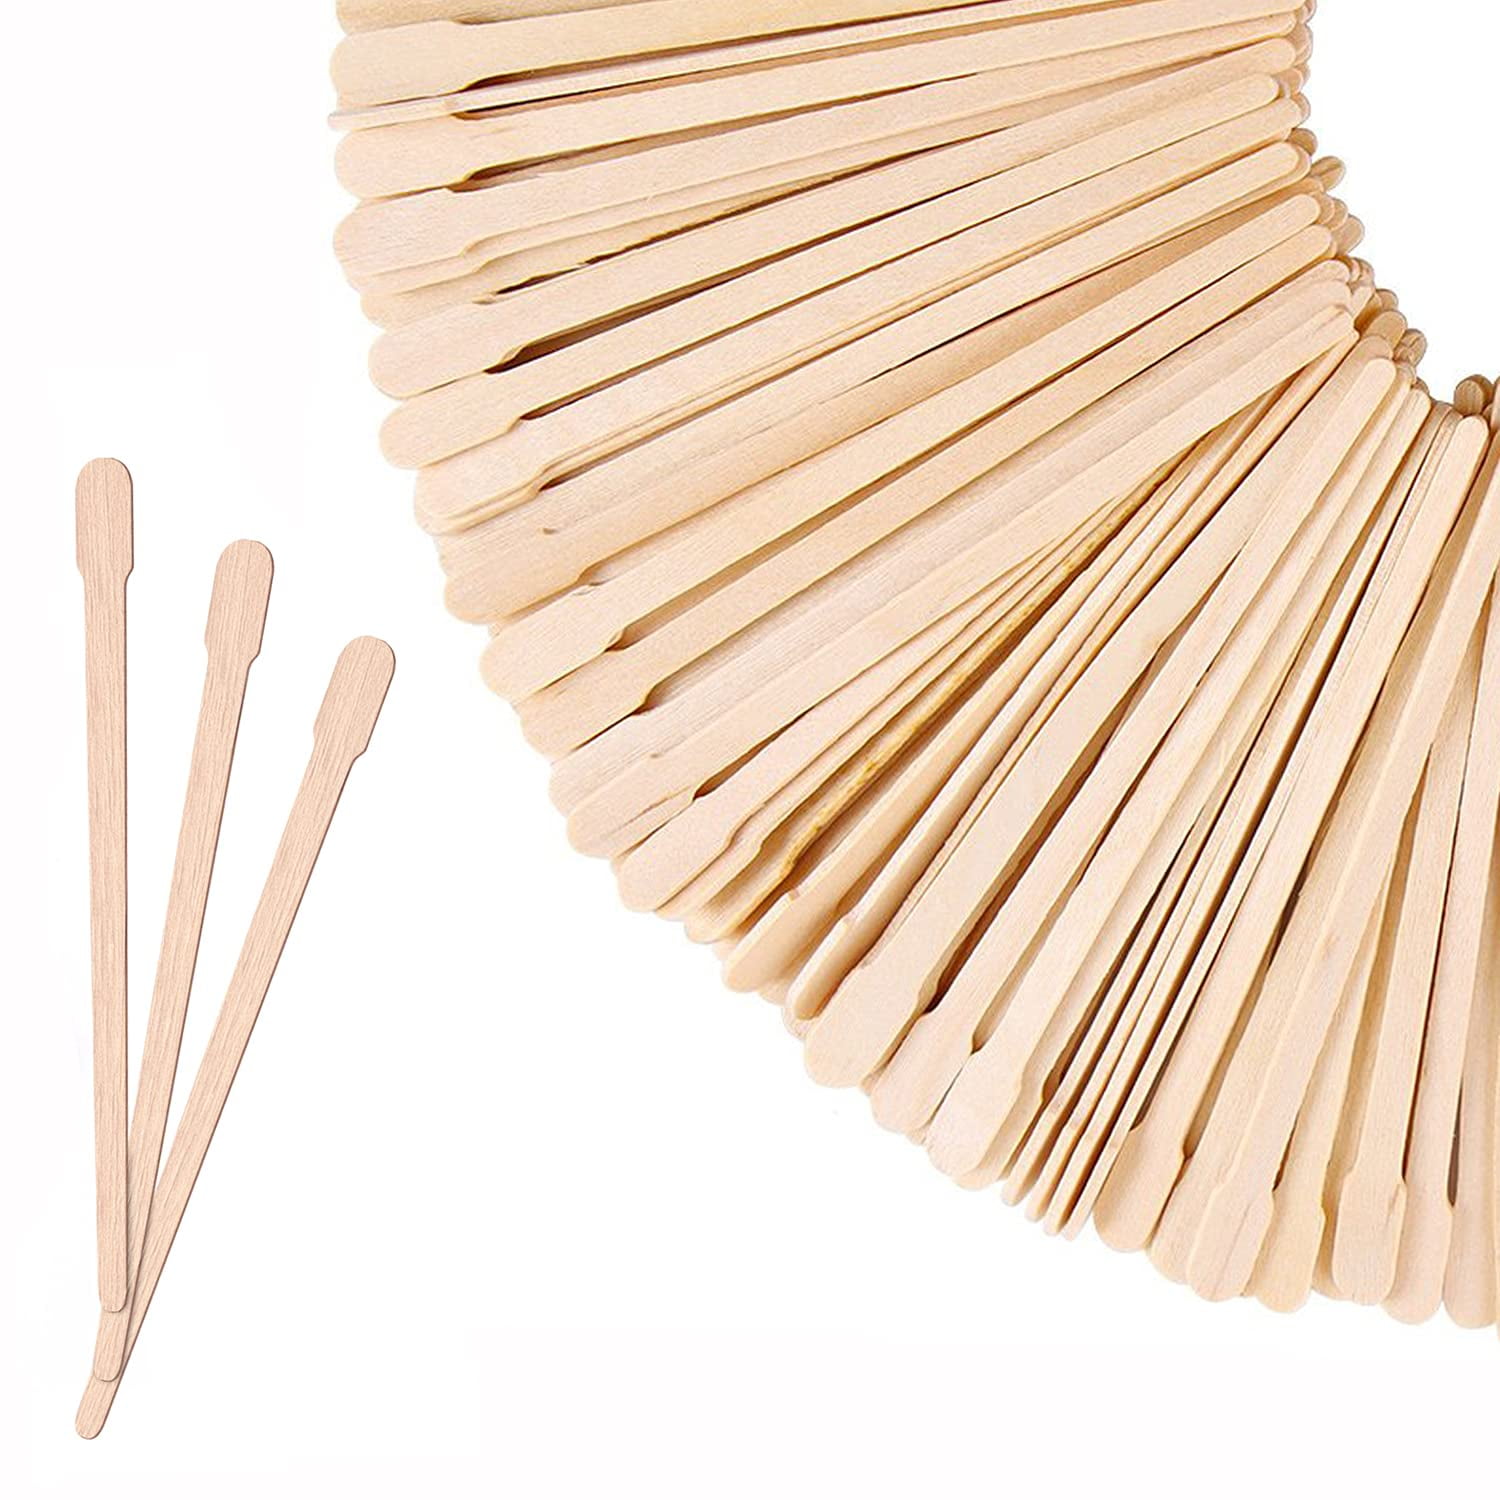 SelfTek 100 Pcs Wooden Wax Applicator Spatulas Sticks for Hair Removal and  Smooth Skin, Wax Popsicle Stick Eyebrow Waxing Sticks for Lip, Nose Wax  Applicator Sticks